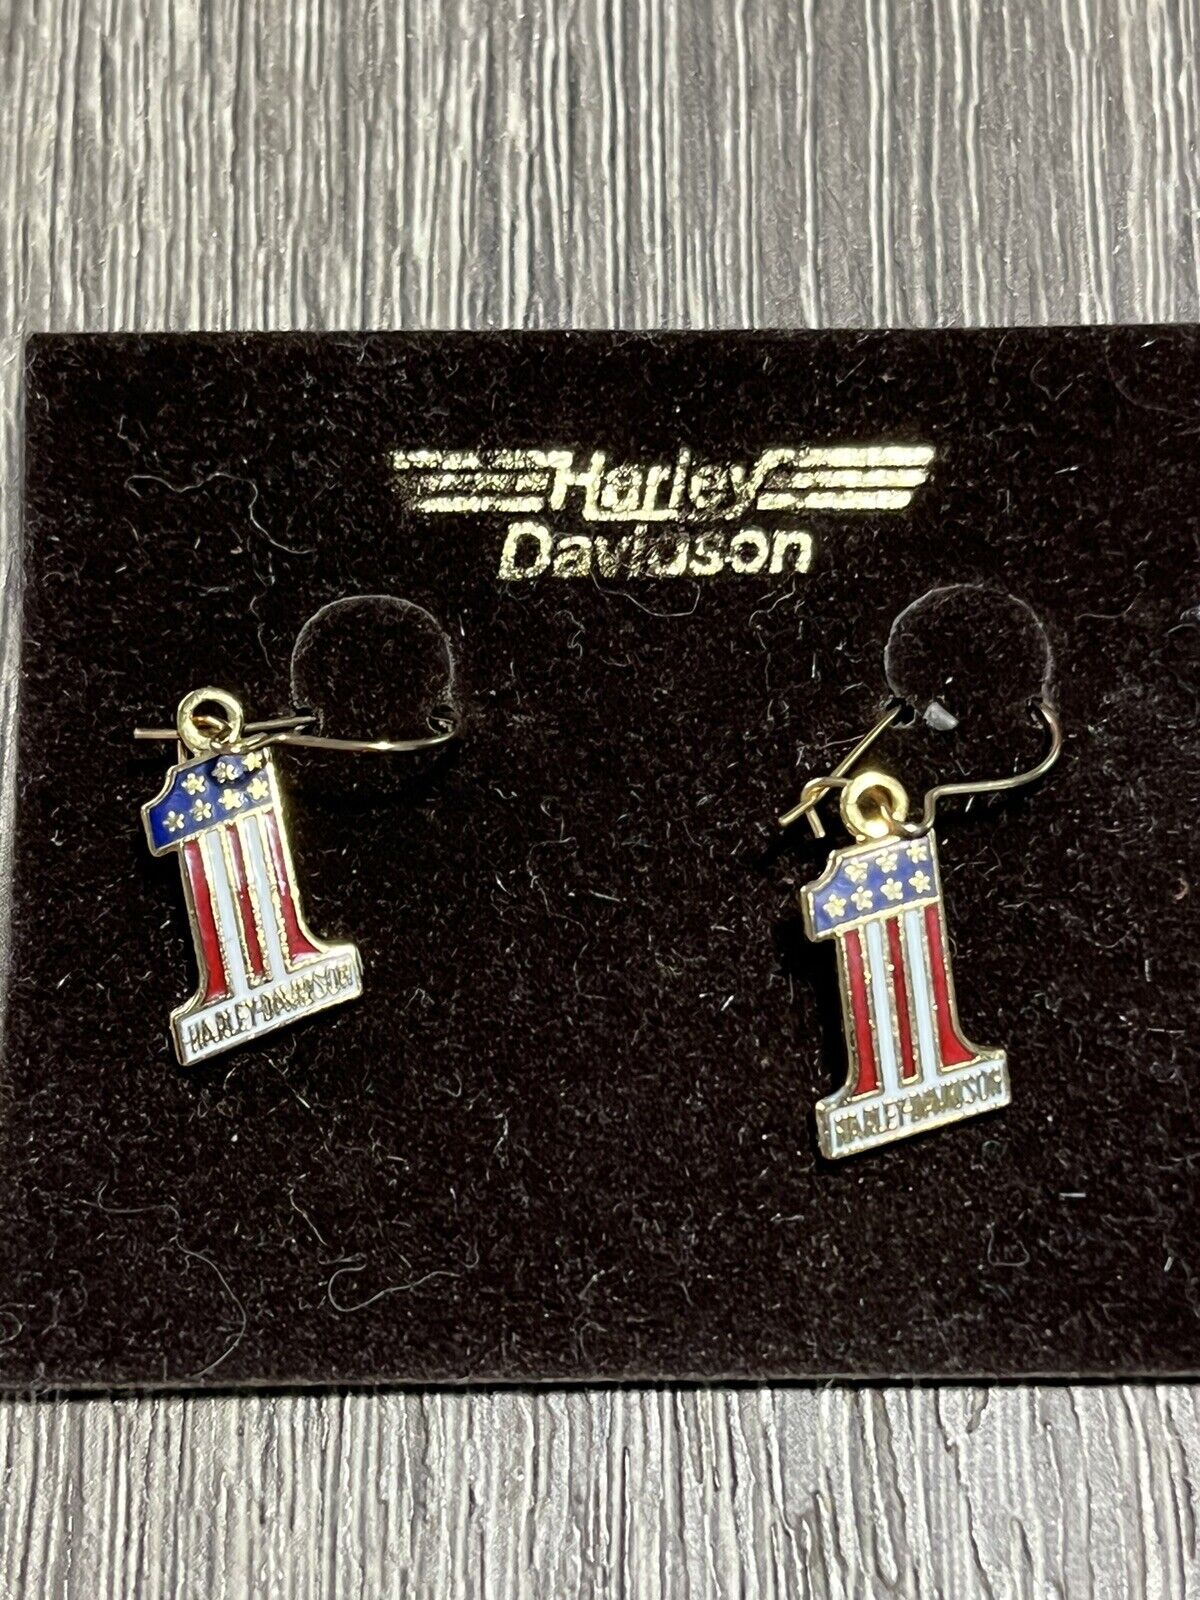 RARE NOS HARLEY DAVIDSON #1 Earrings Gold toned Stamped Jewelry 1 One Stars USA